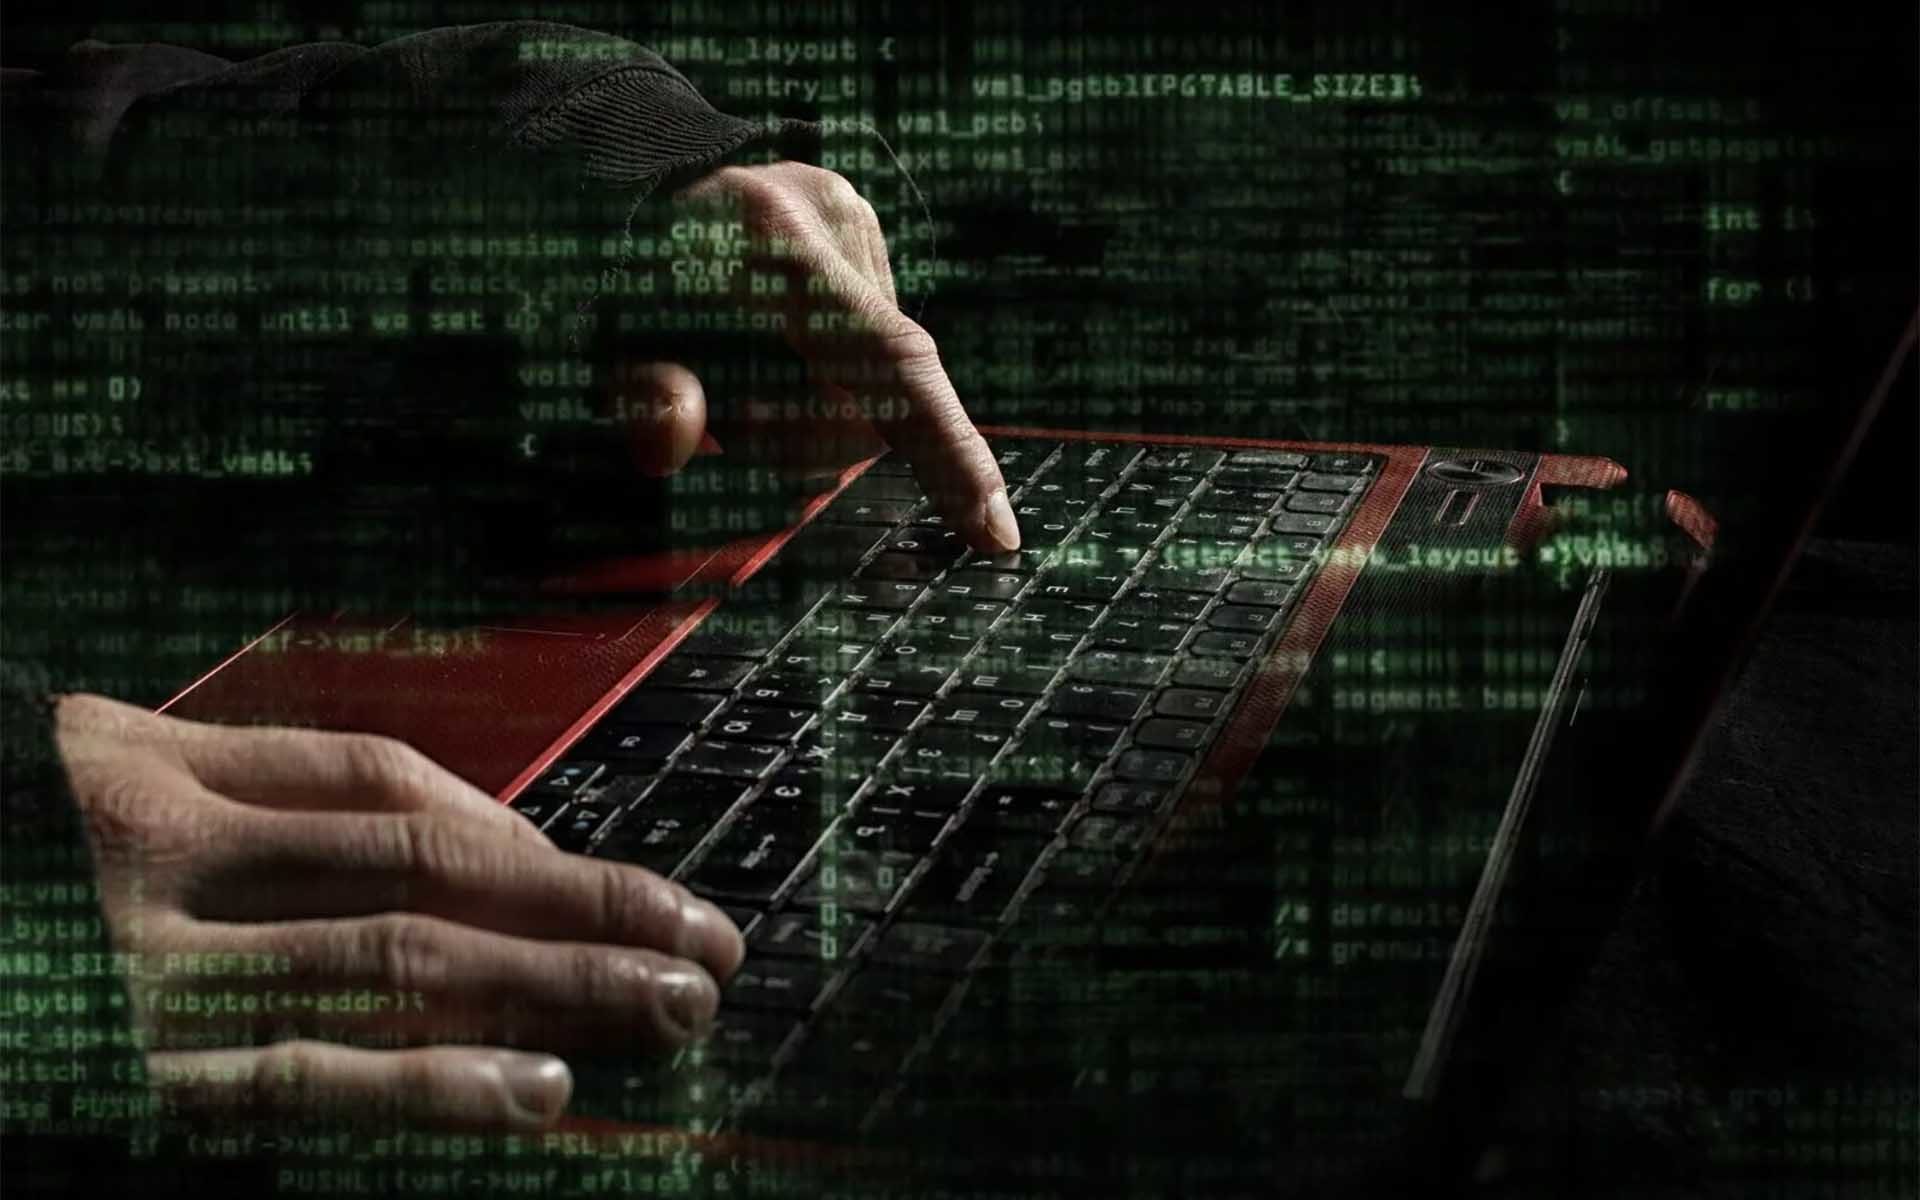 Altsbit Crypto Exchange Gets Hacked, 'Almost All Funds' Have Gone